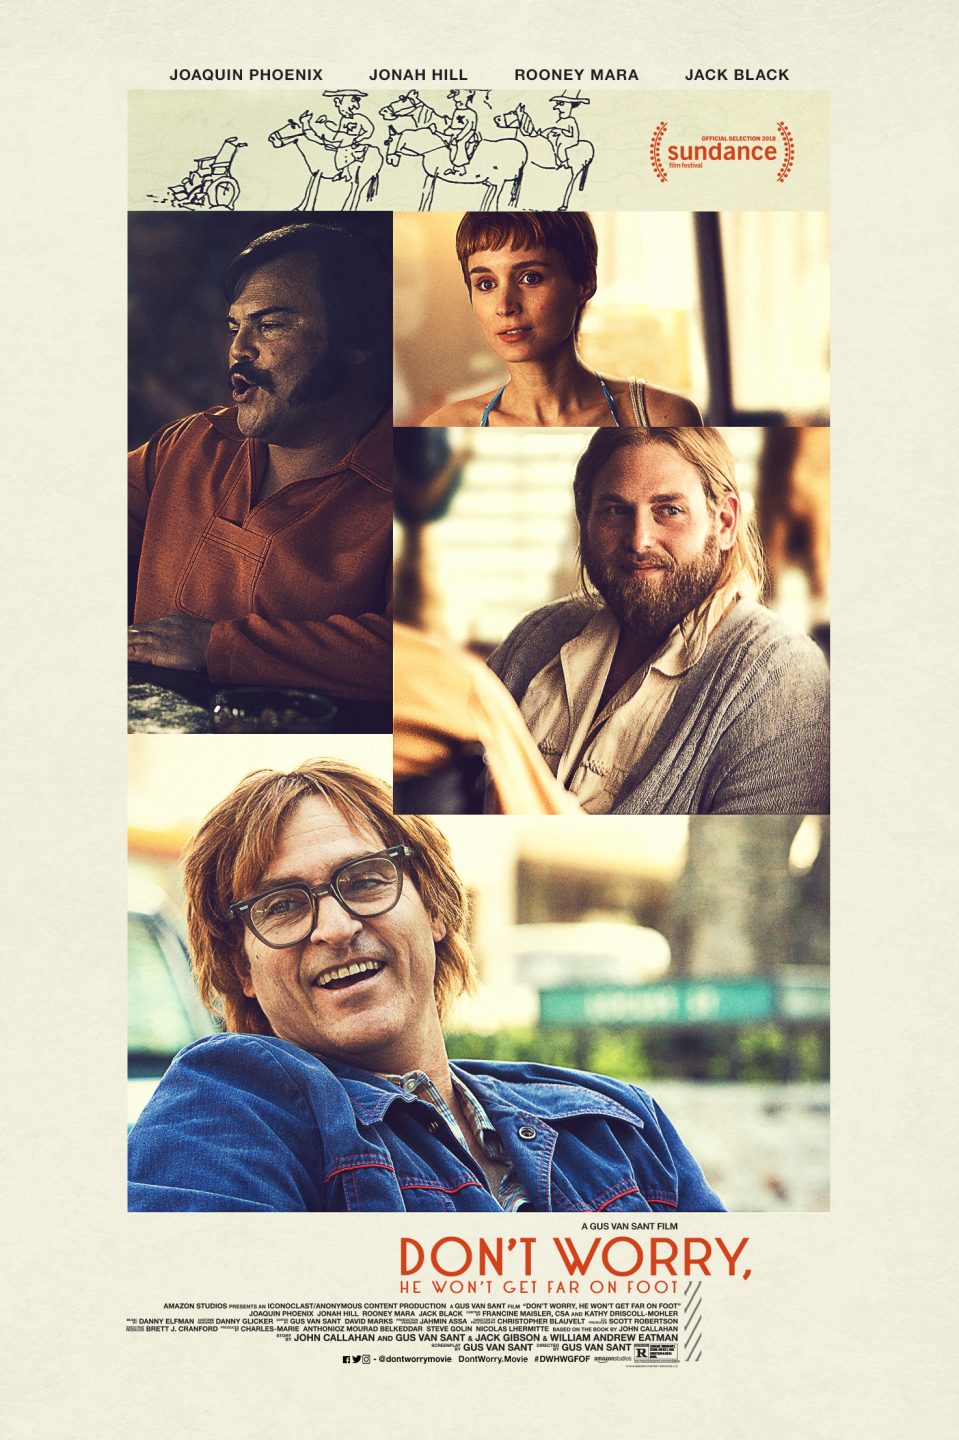 Don't Worry, He Won't Get Far On Foot poster (Amazon Studios)